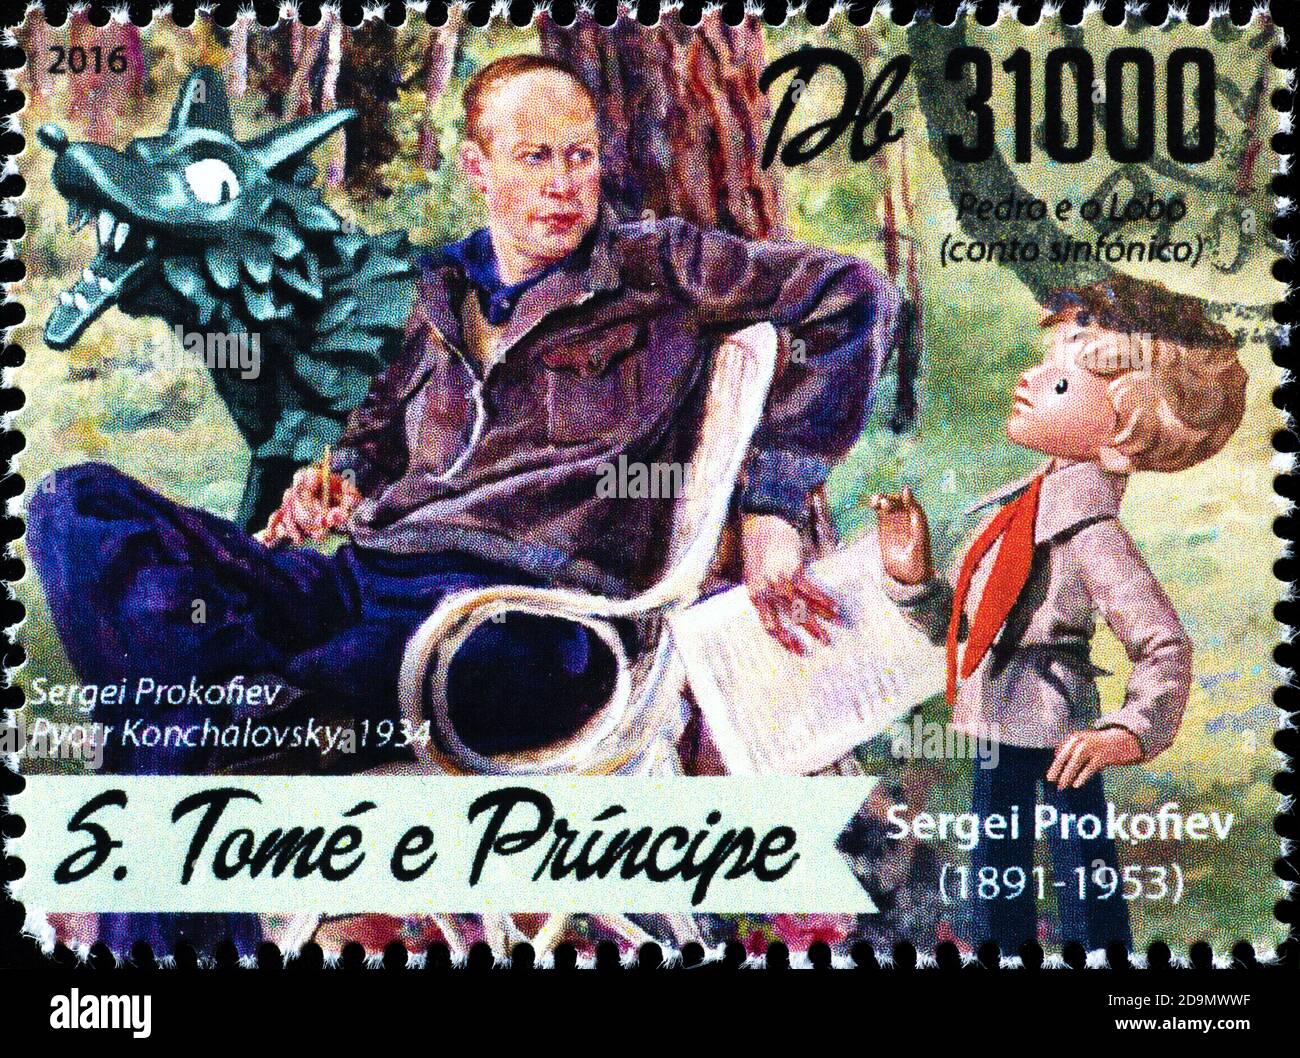 Peter and the wolf by Sergei Prokofiev on stamp Stock Photo